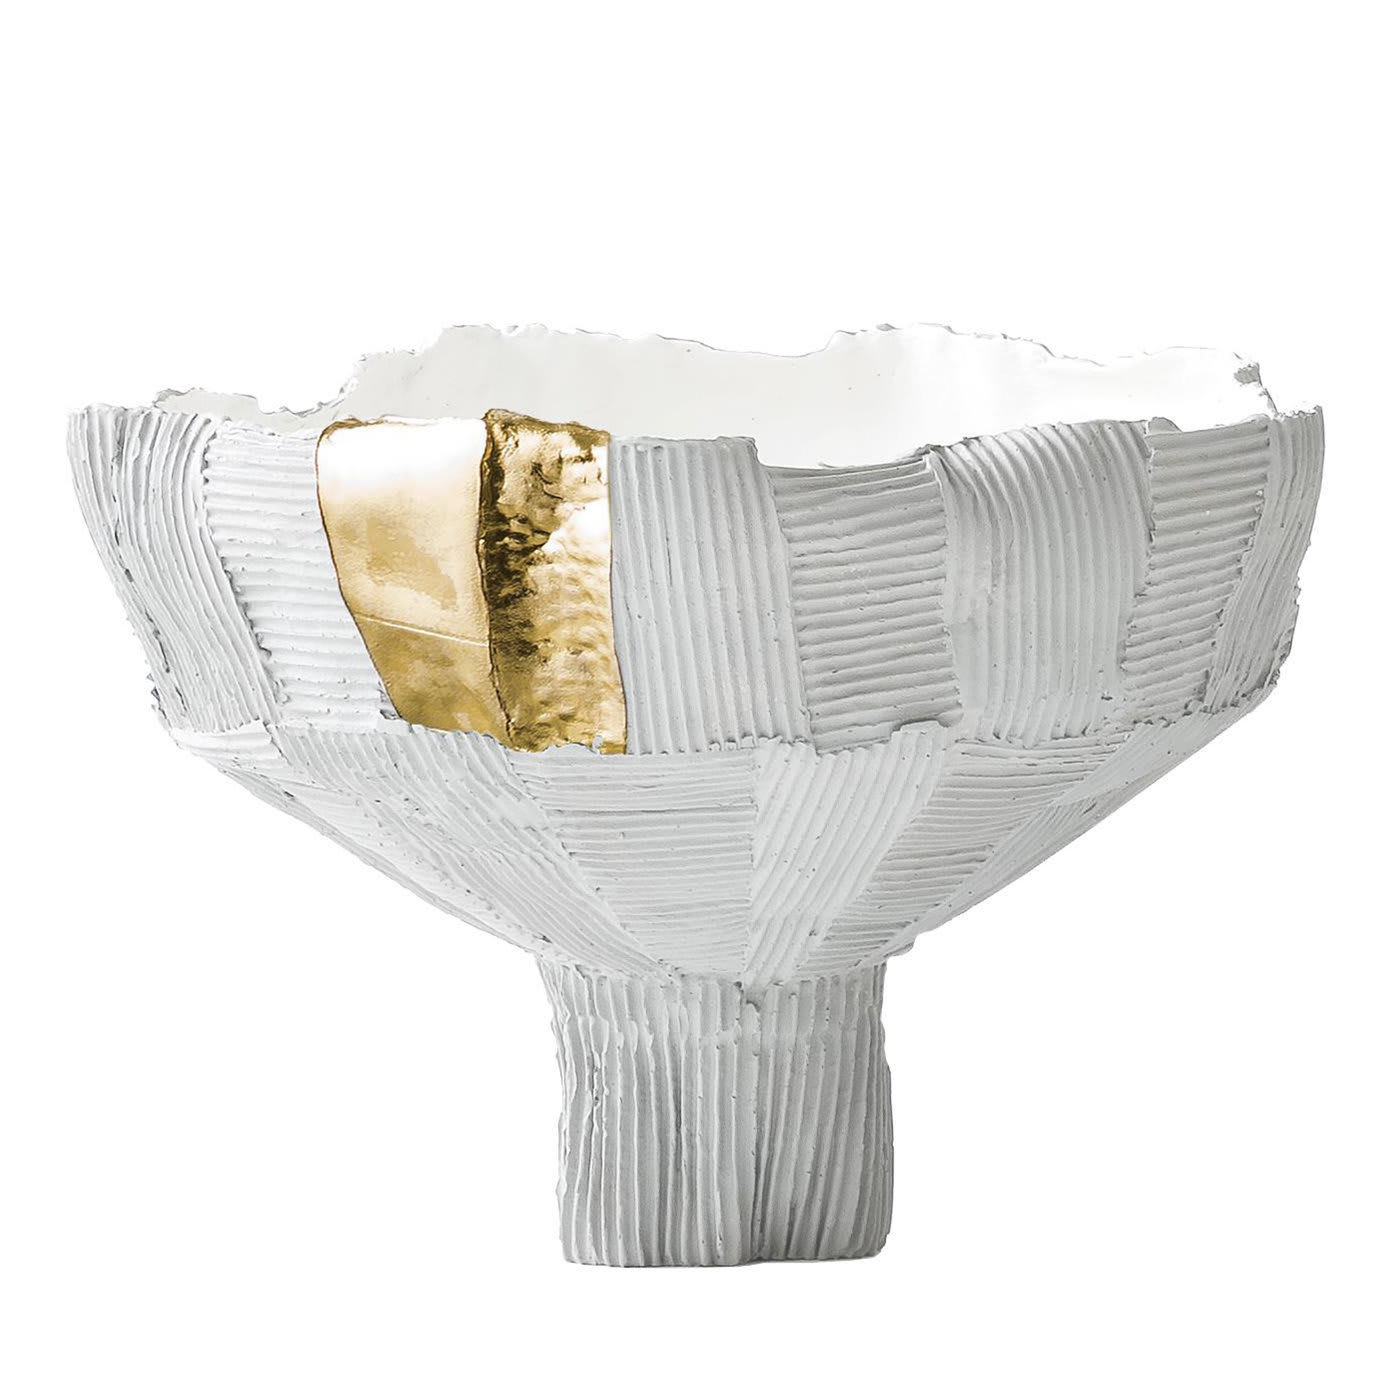 Anemone White and Gold Large Footed Bowl - Paola Paronetto